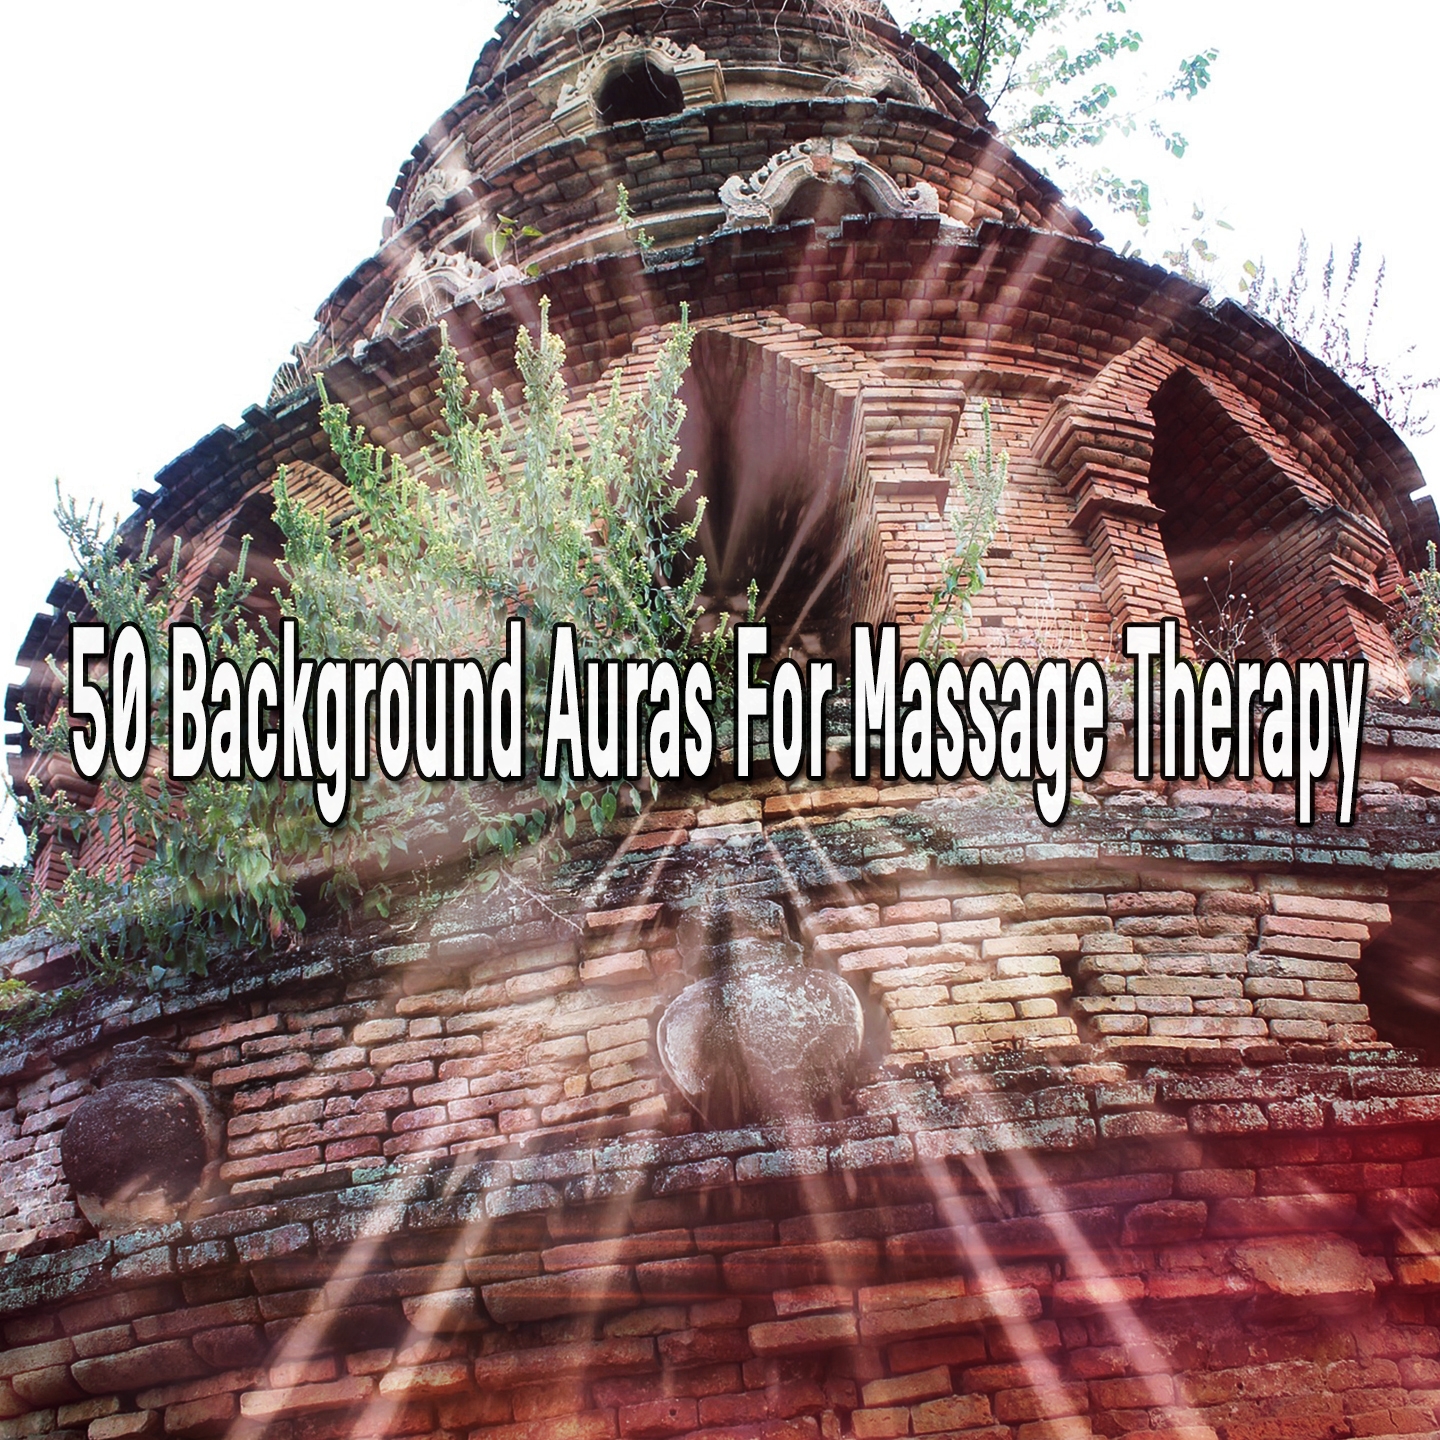 50 Background Auras For Massage Therapy